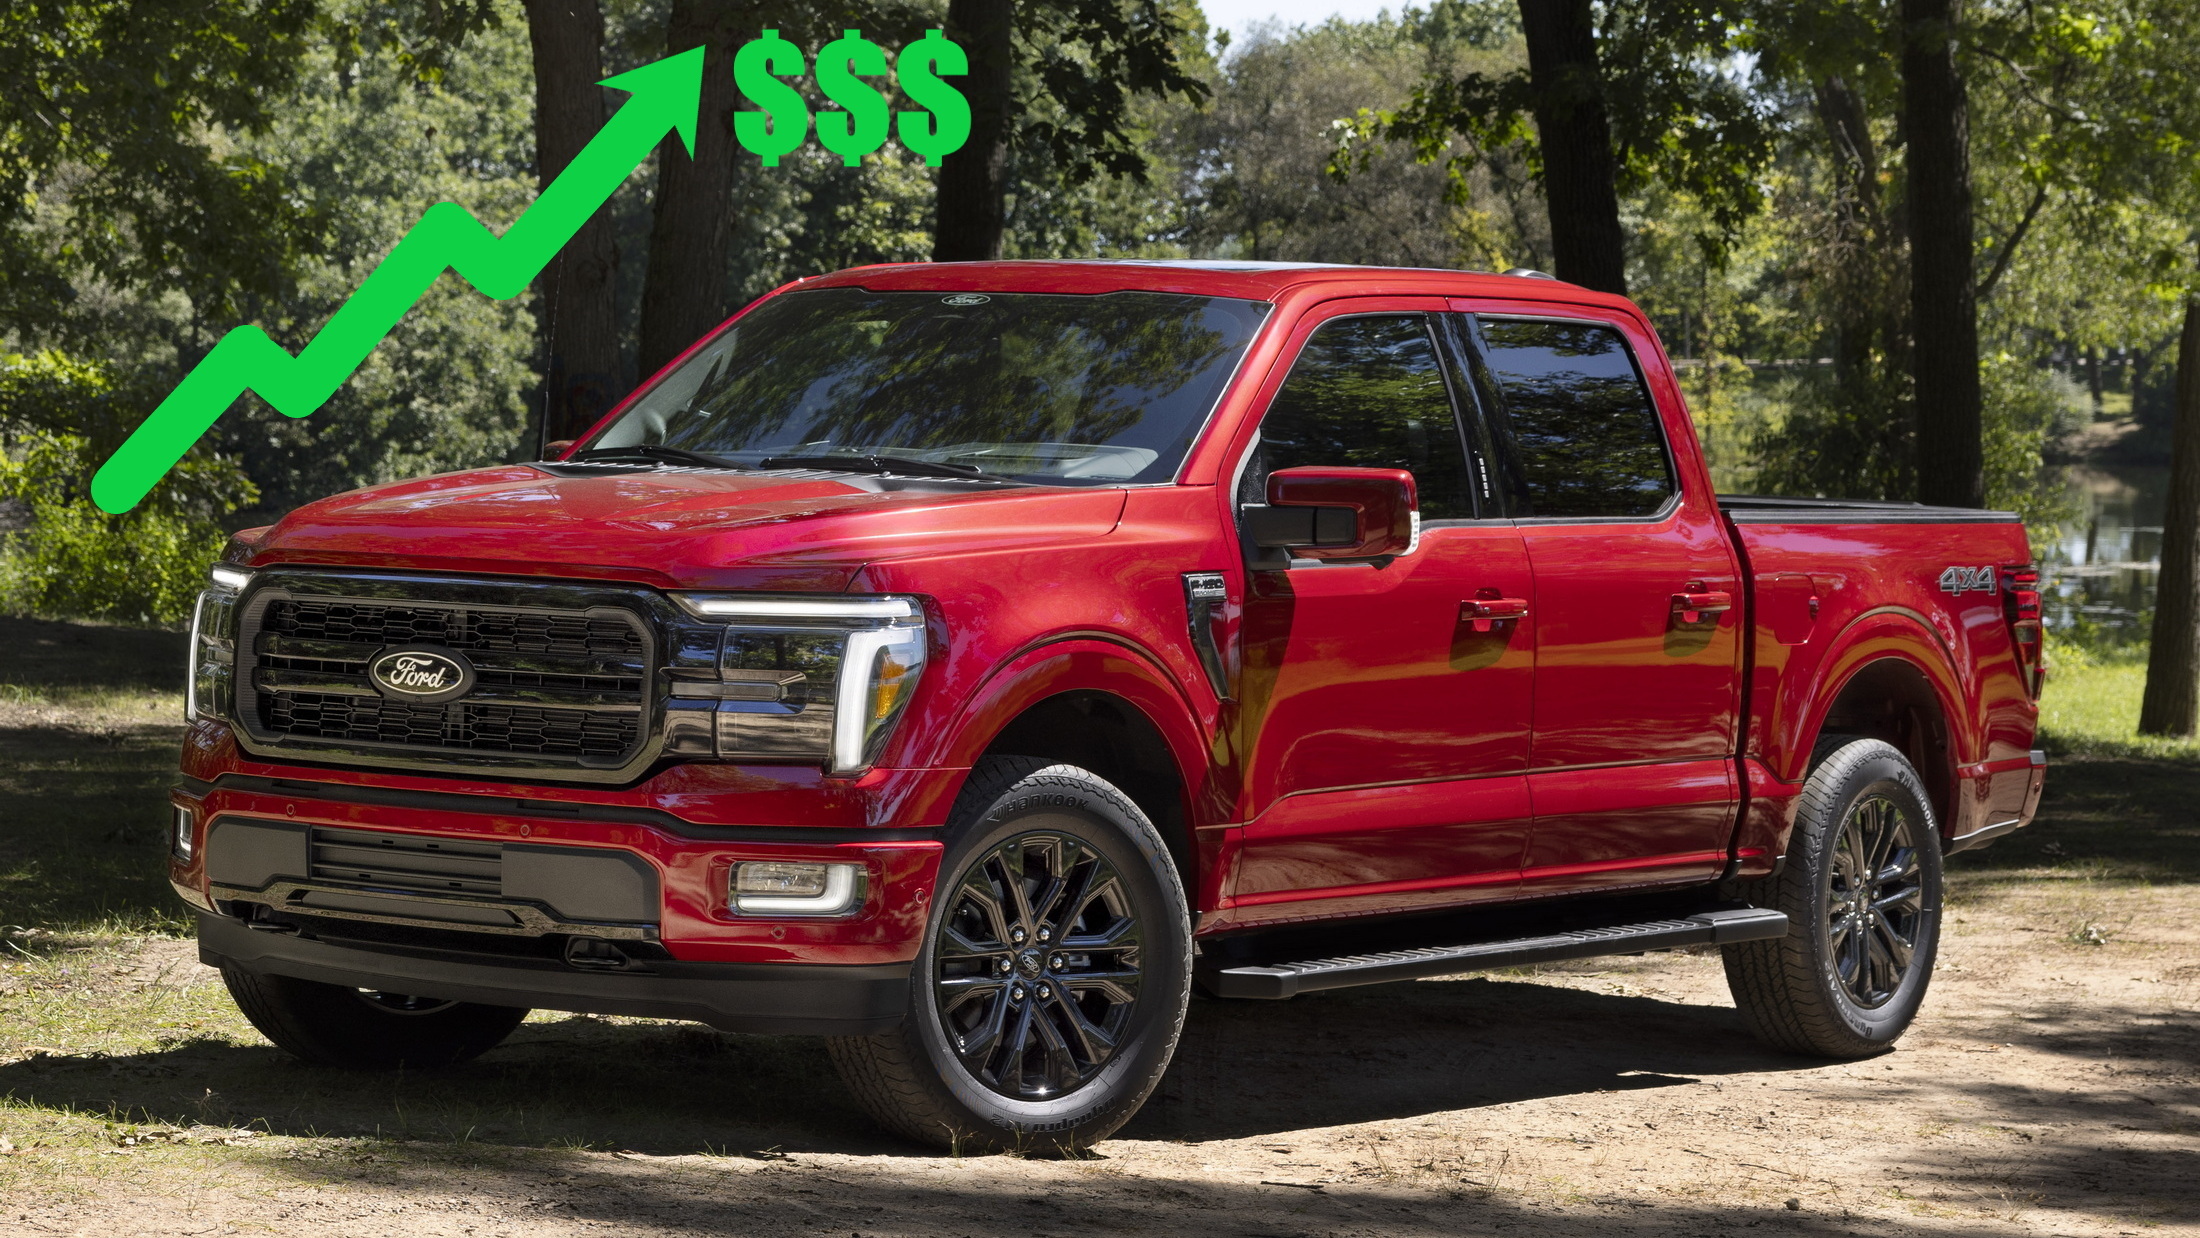 2021 Ford F-150 Pickup Is Less of an Overhaul Than We Expected